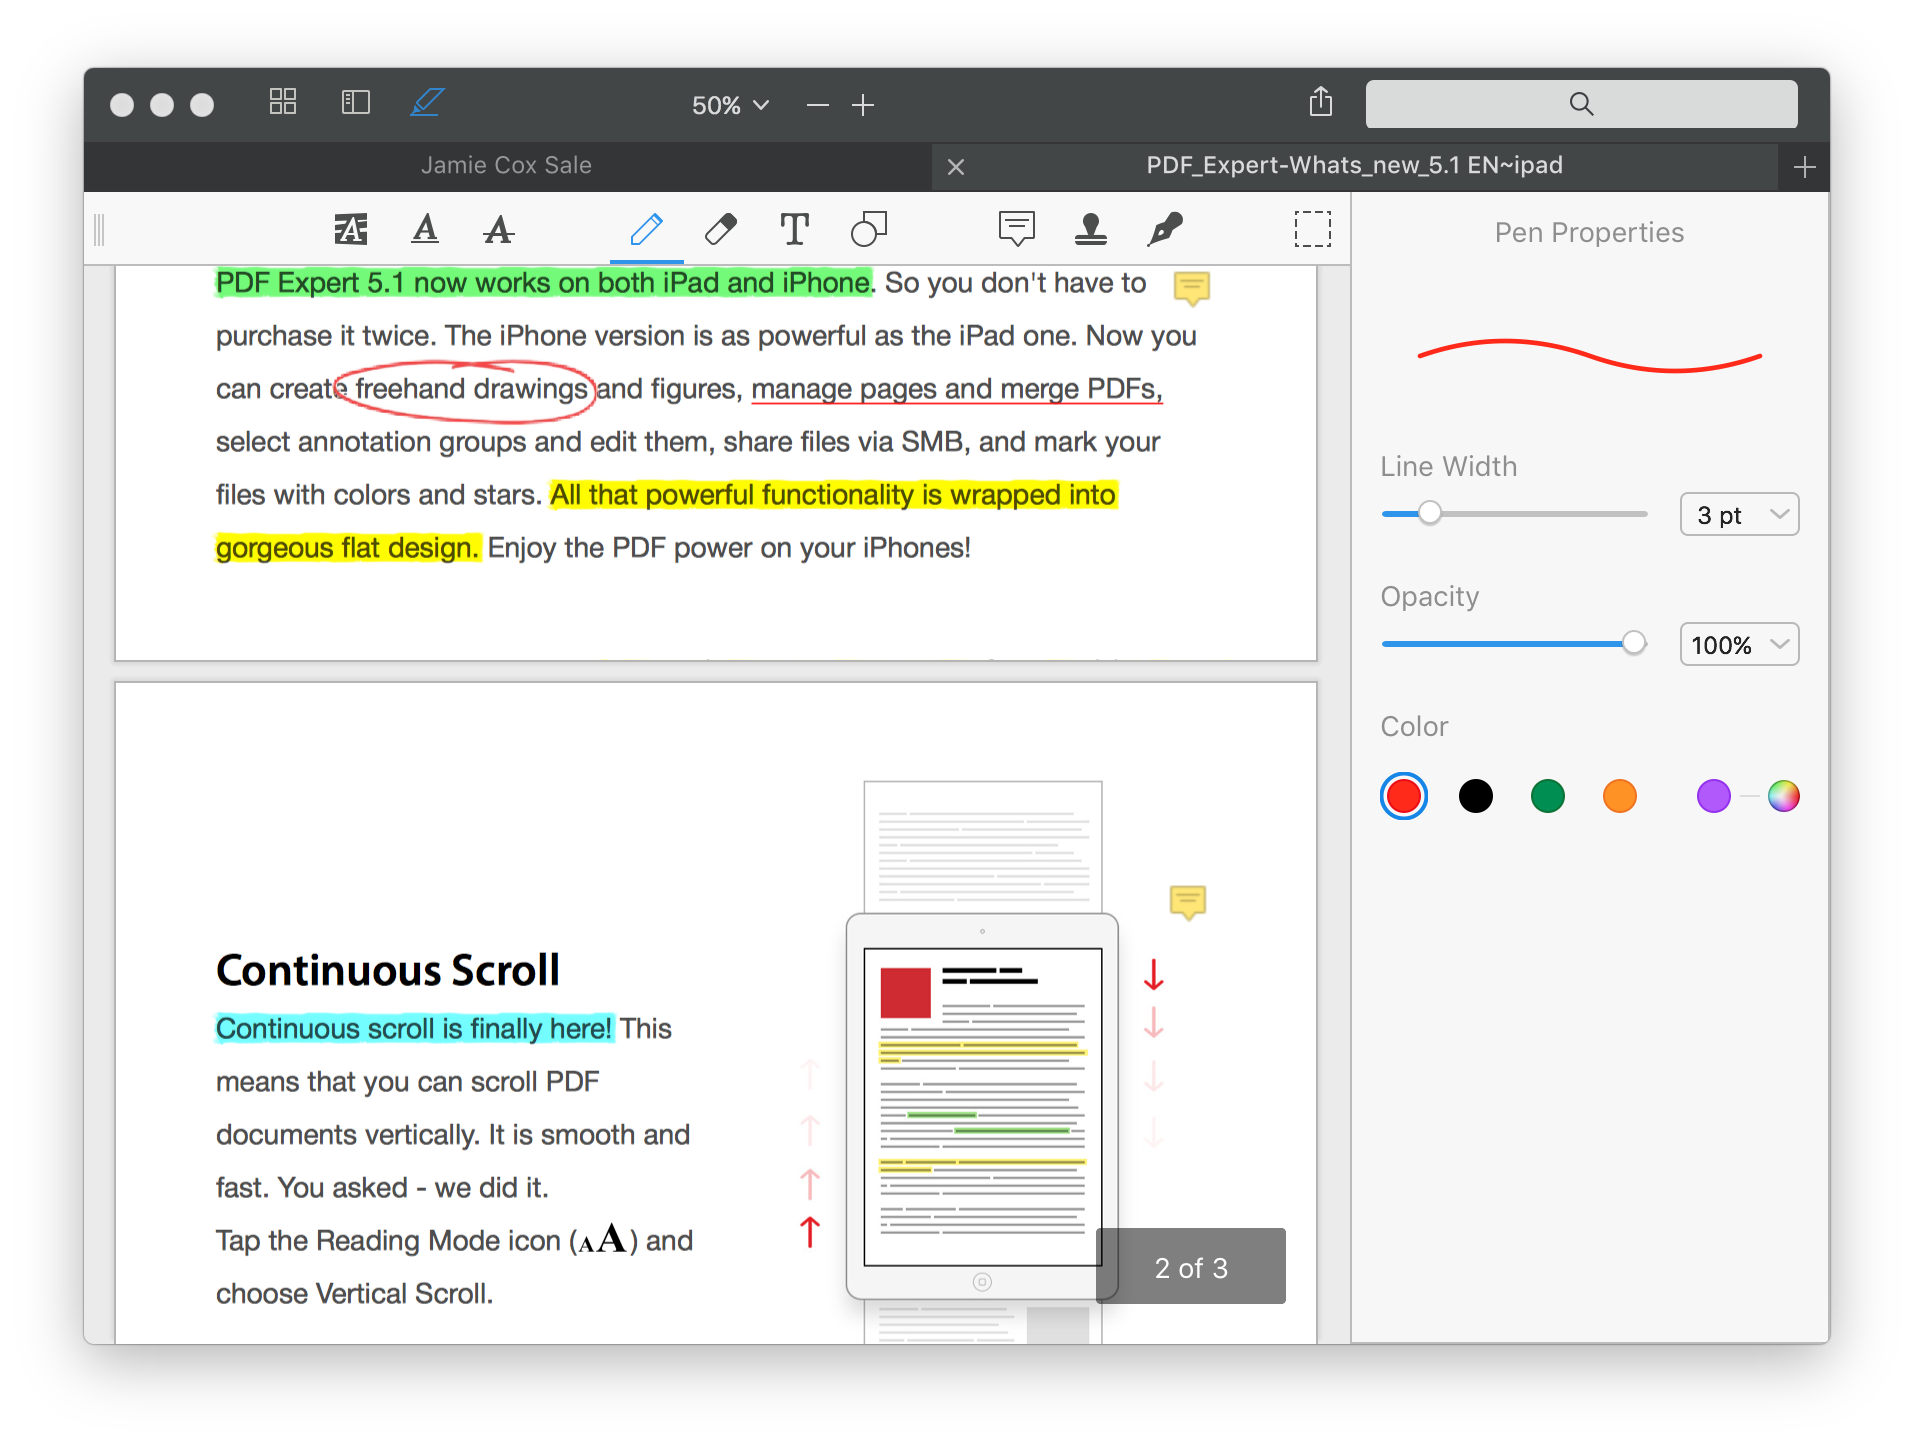 pdf expert free for mac if bought on ipad